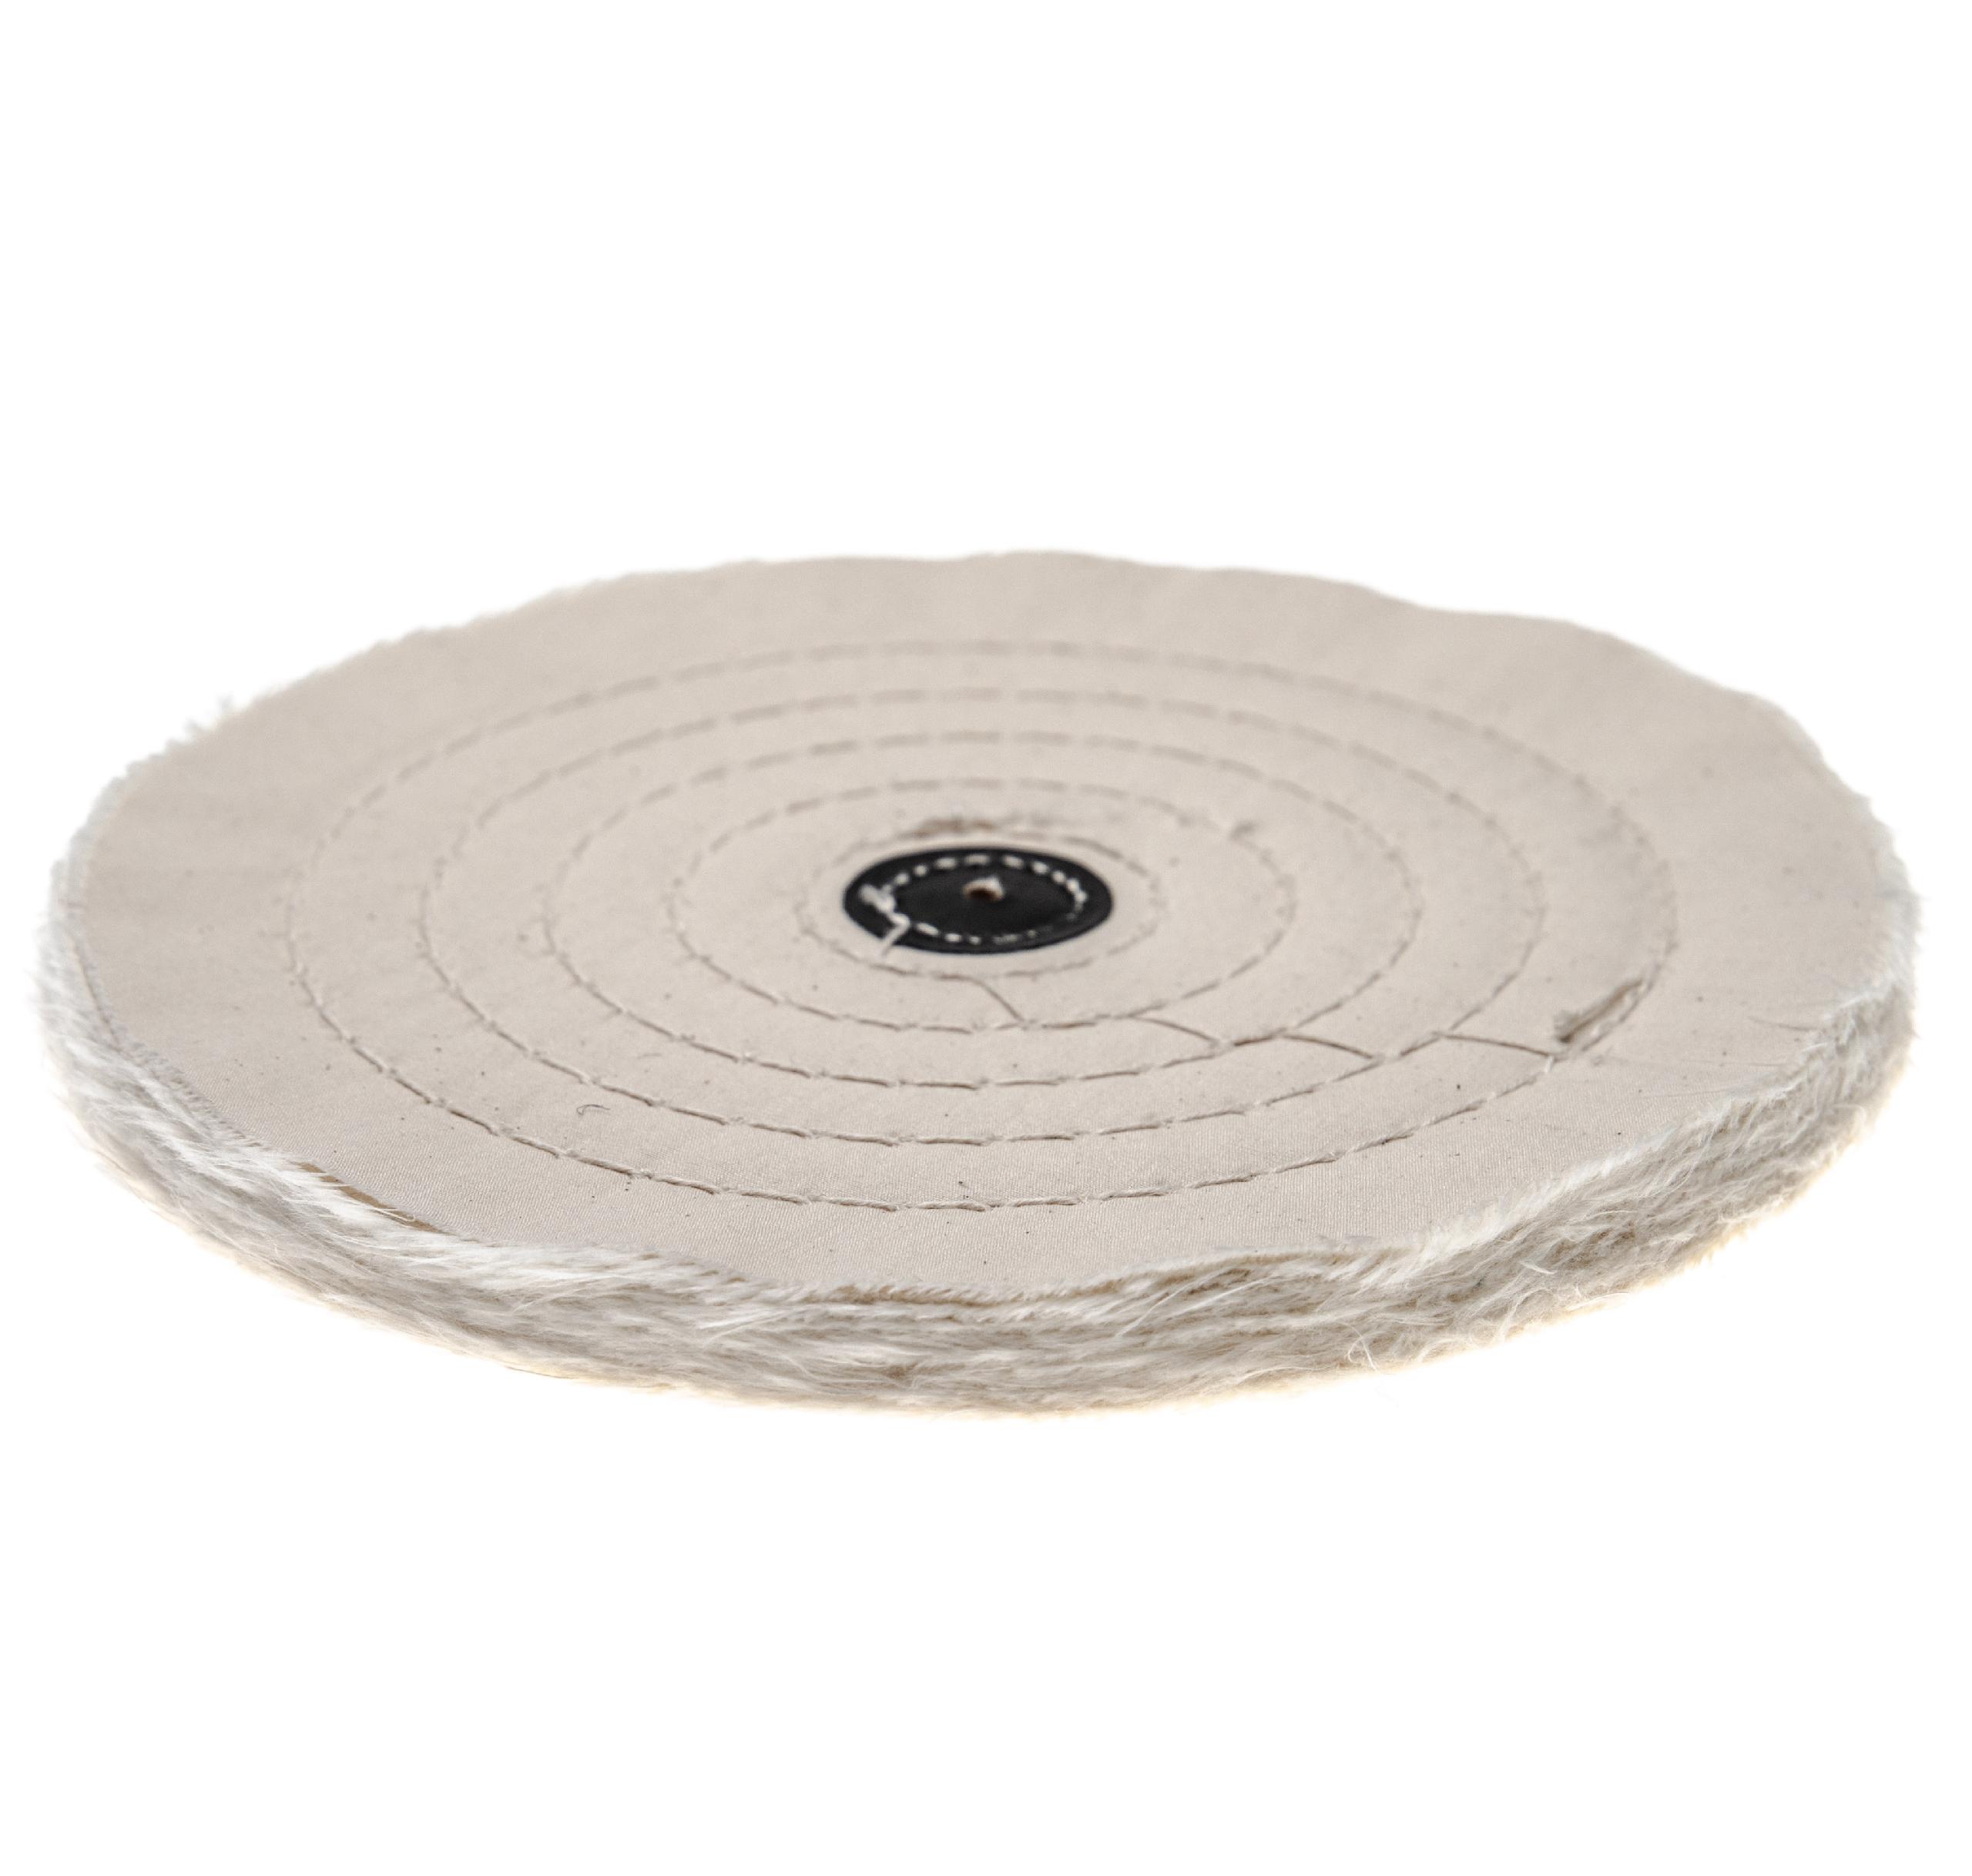 Polishing Pad suitable for all Standard Angle Grinders, Screwdrivers with 21.5cm Diameter - cream